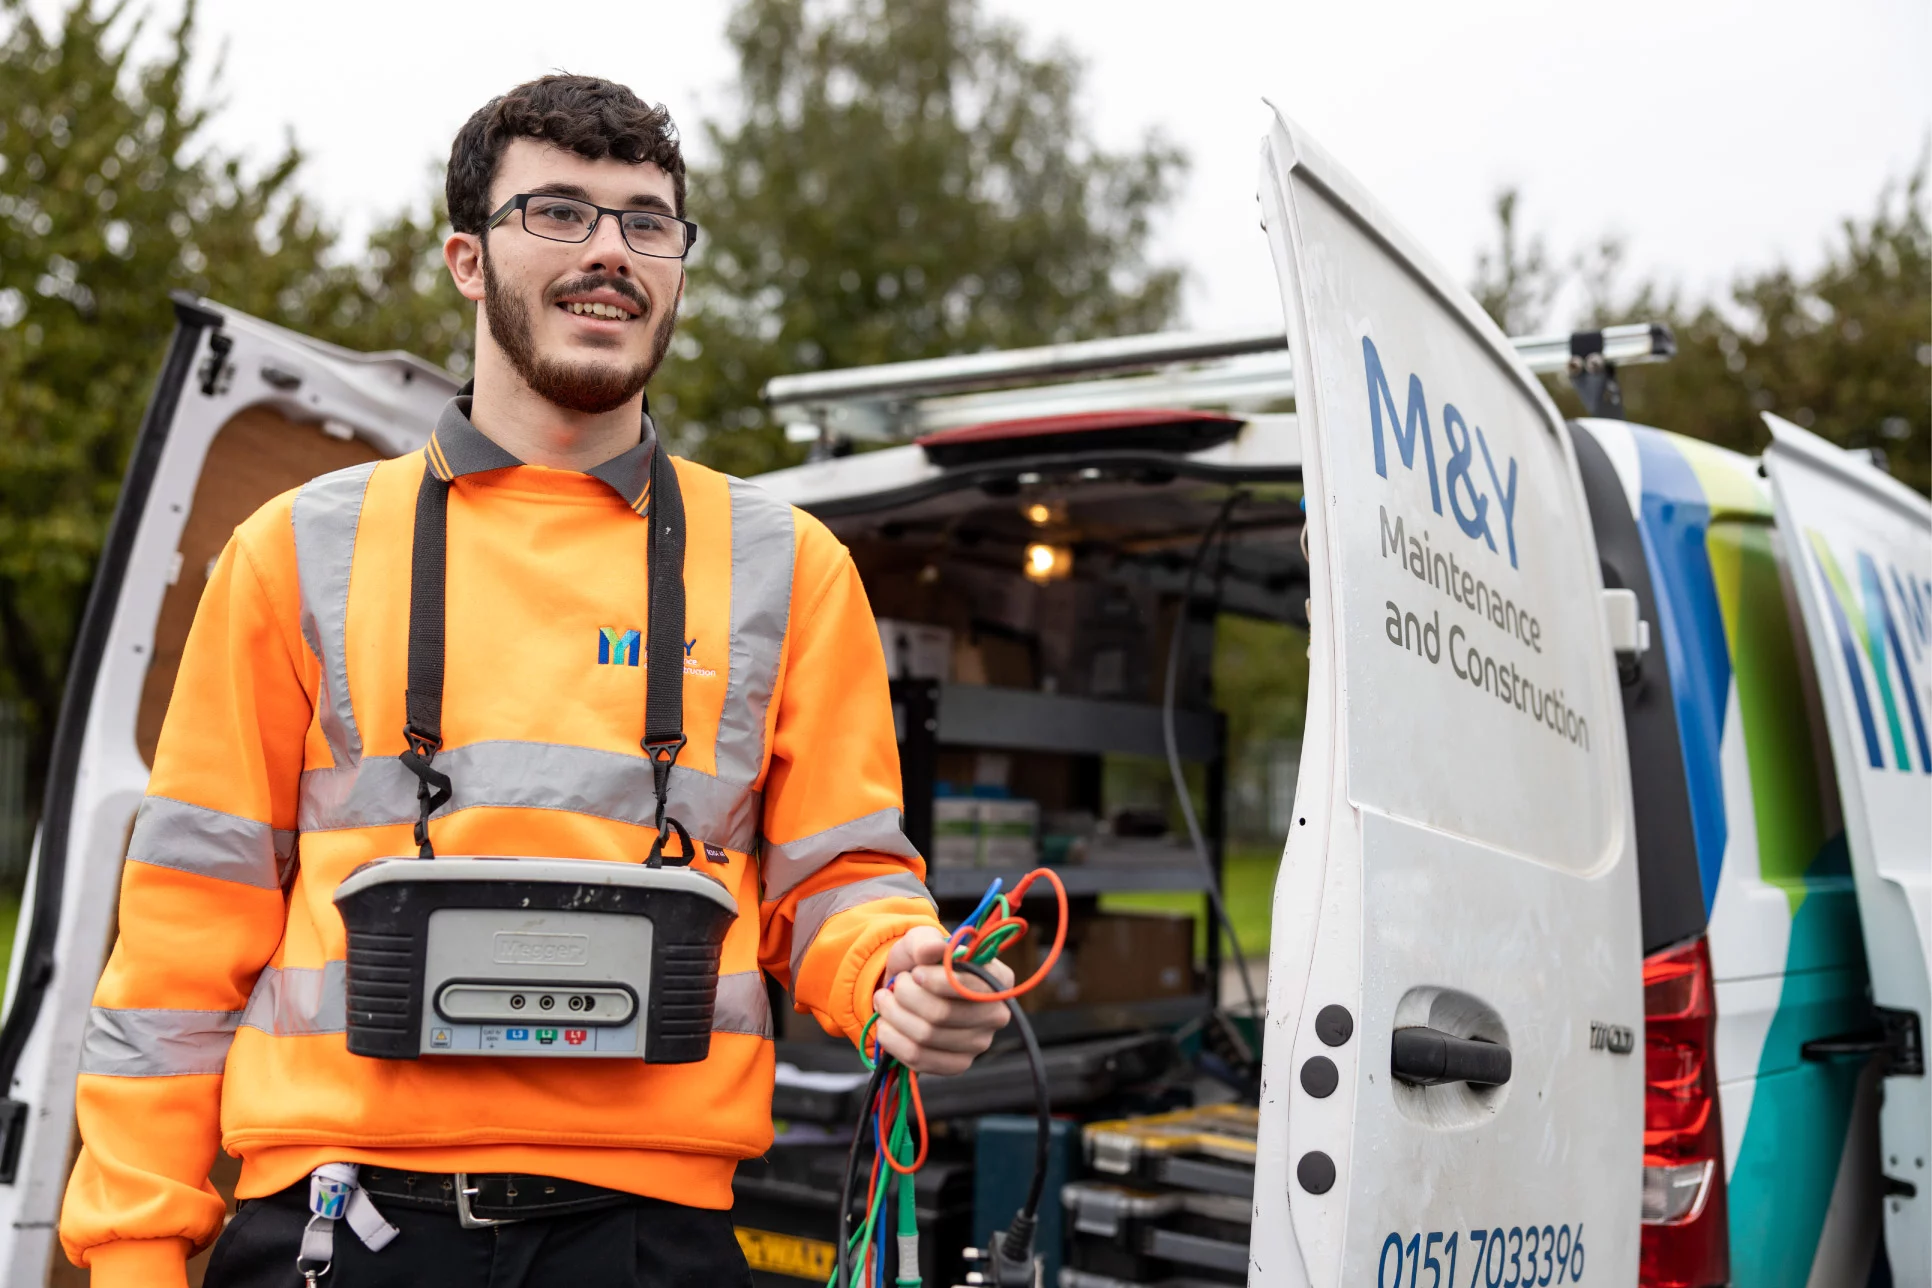 M&Y Operative smiling with electrical testing kit picture next to open M&Y van